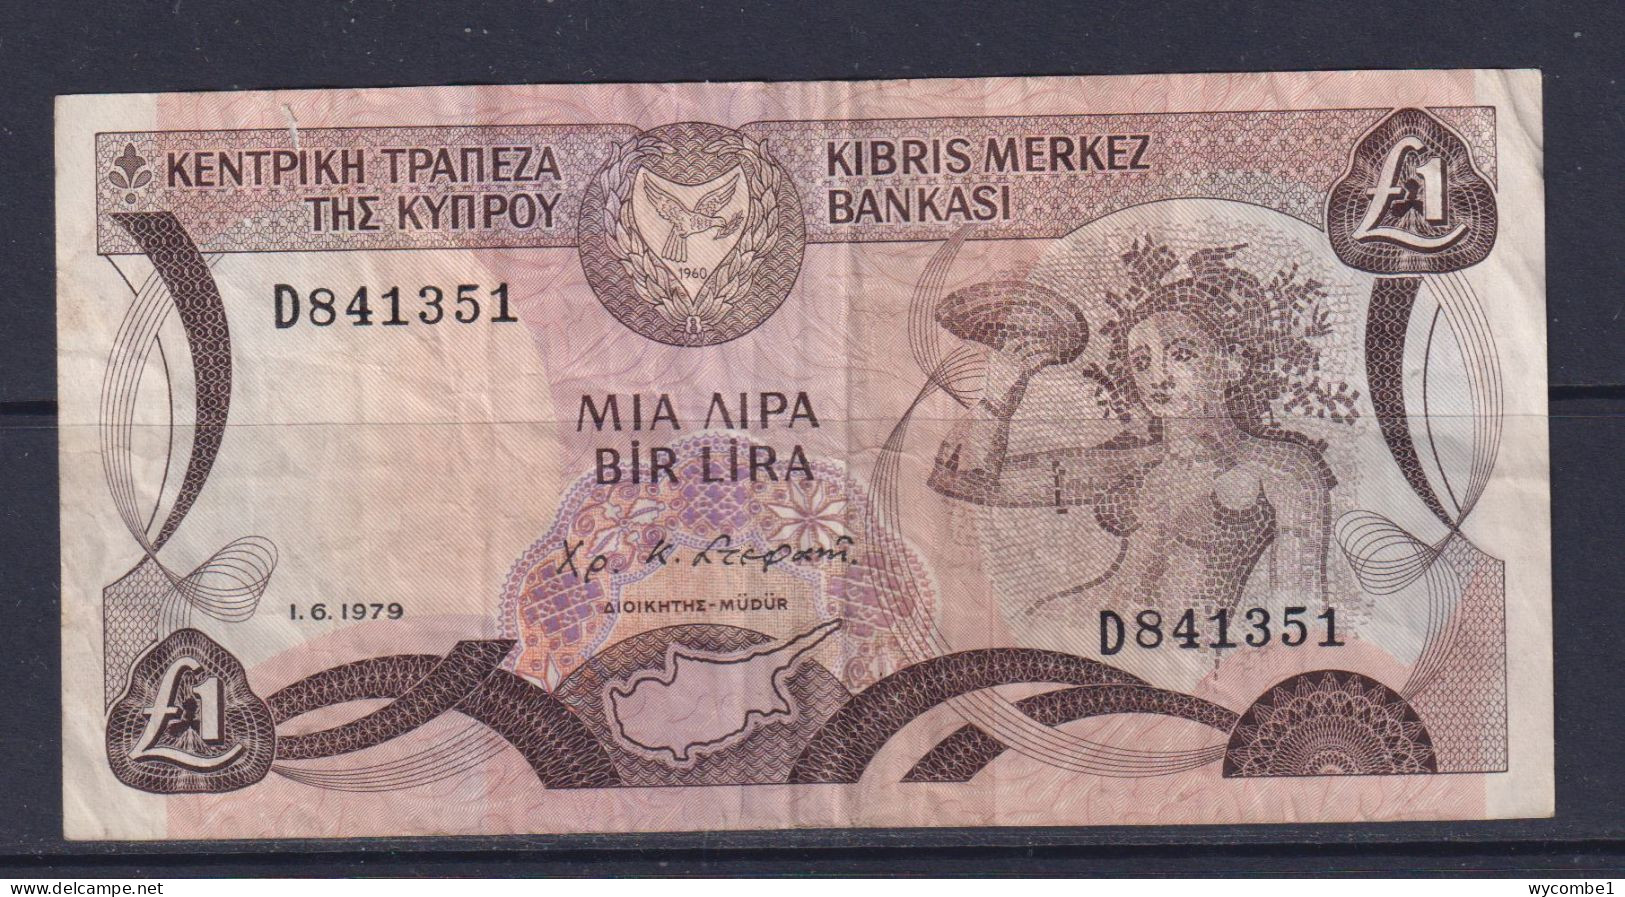 CYPRUS - 1979 1 Pound Circulated Banknote - Chipre